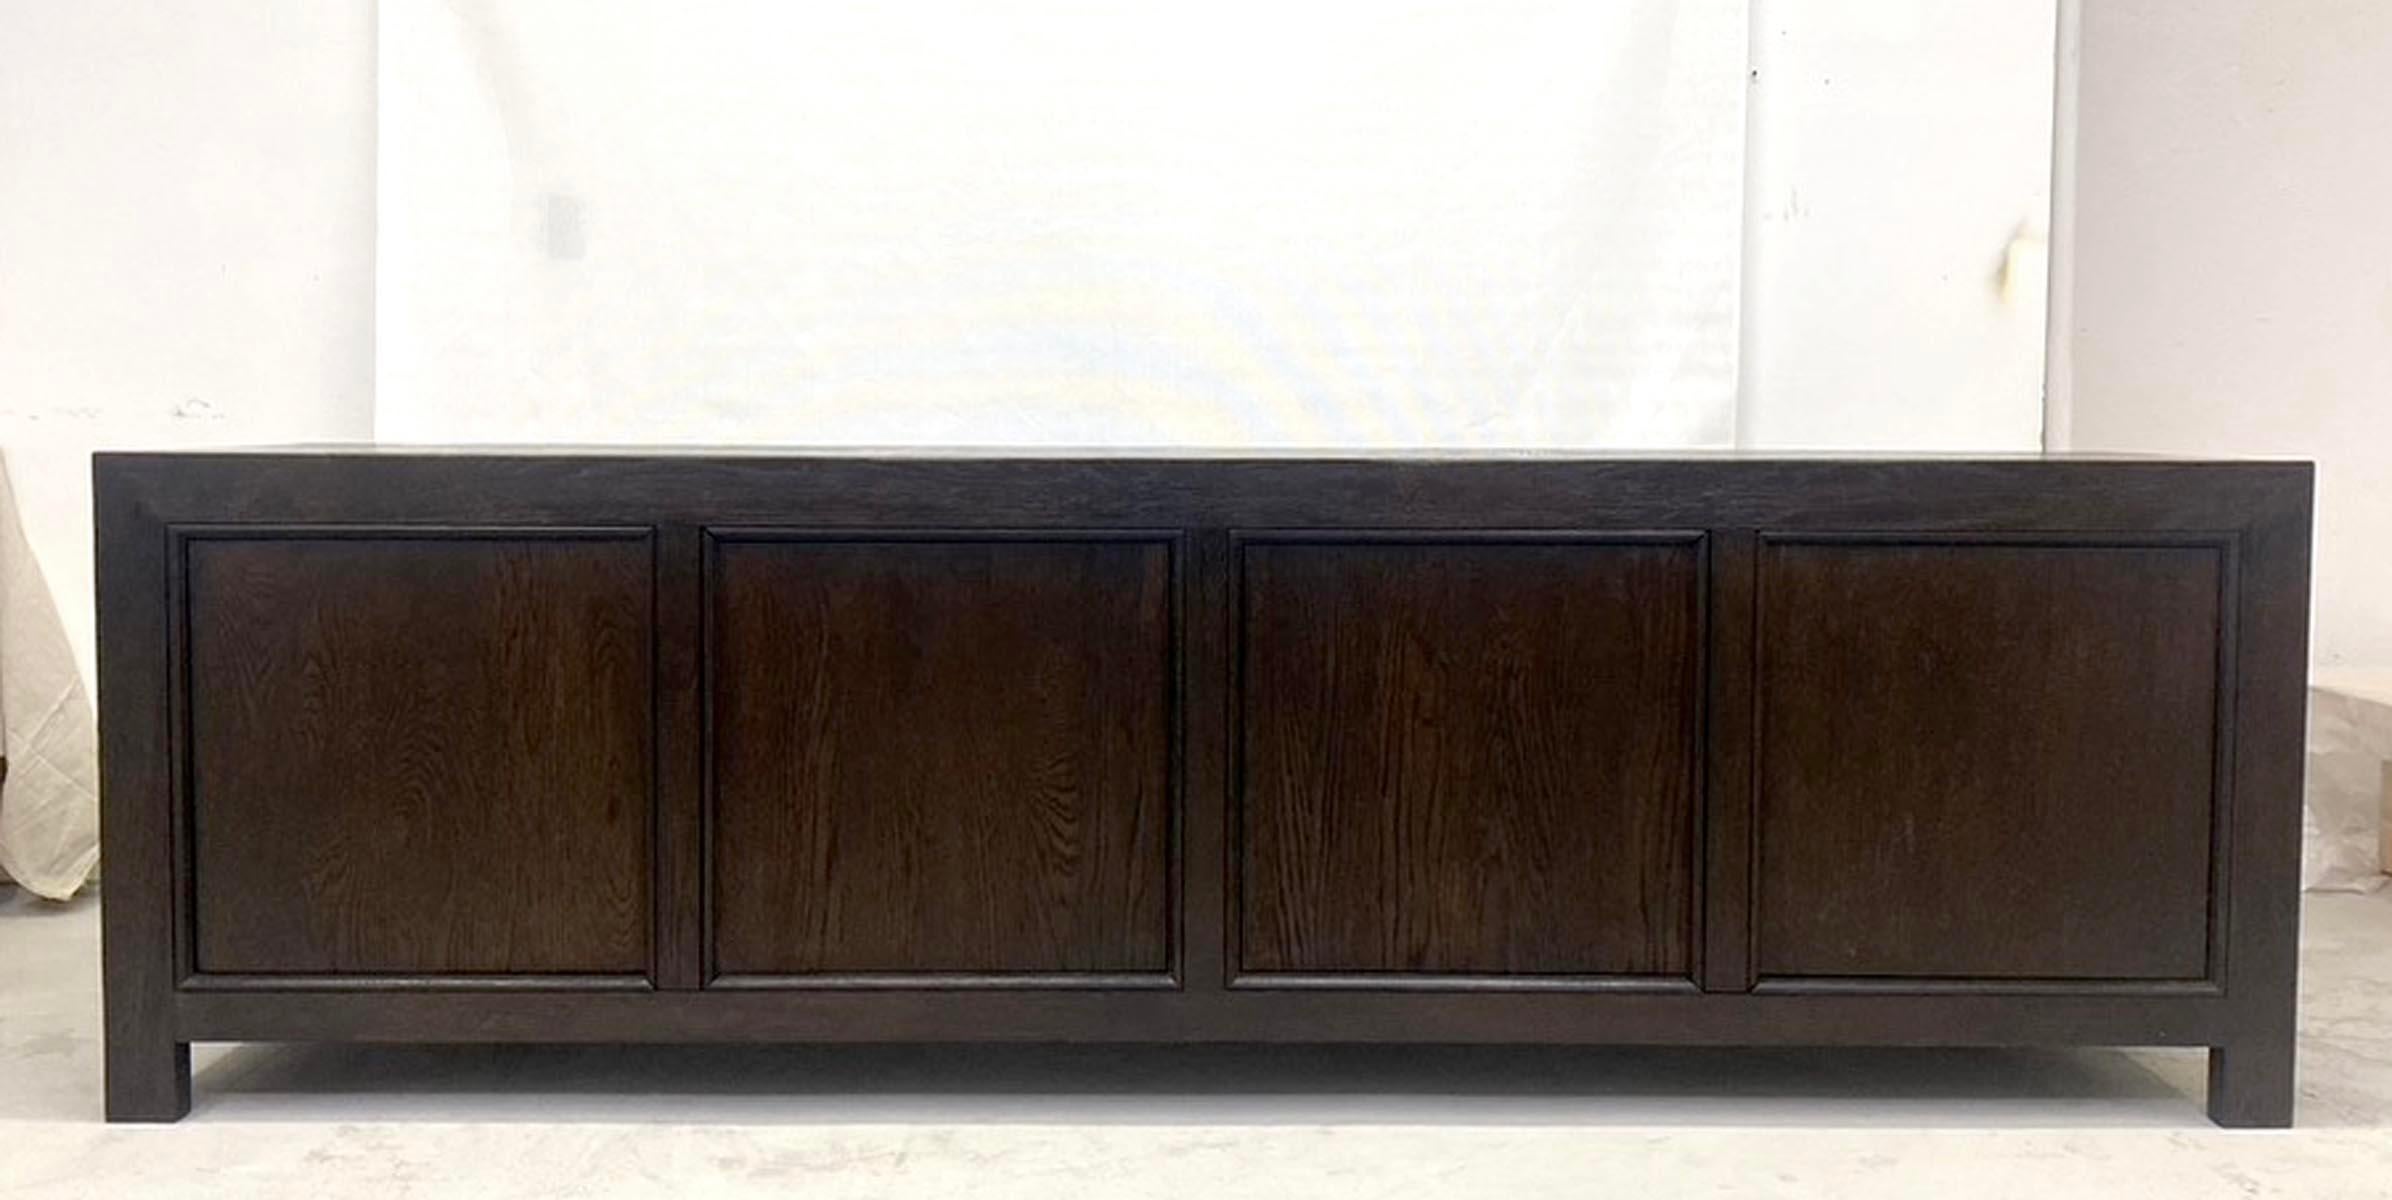 This is our custom Bola cabinet in oak with a dark, ebony finish with wood grain showing. This piece can be made in any size and finish. This specific piece was finished with an open grain and heavy distress. Doors push to open. Solid Oak. The lead